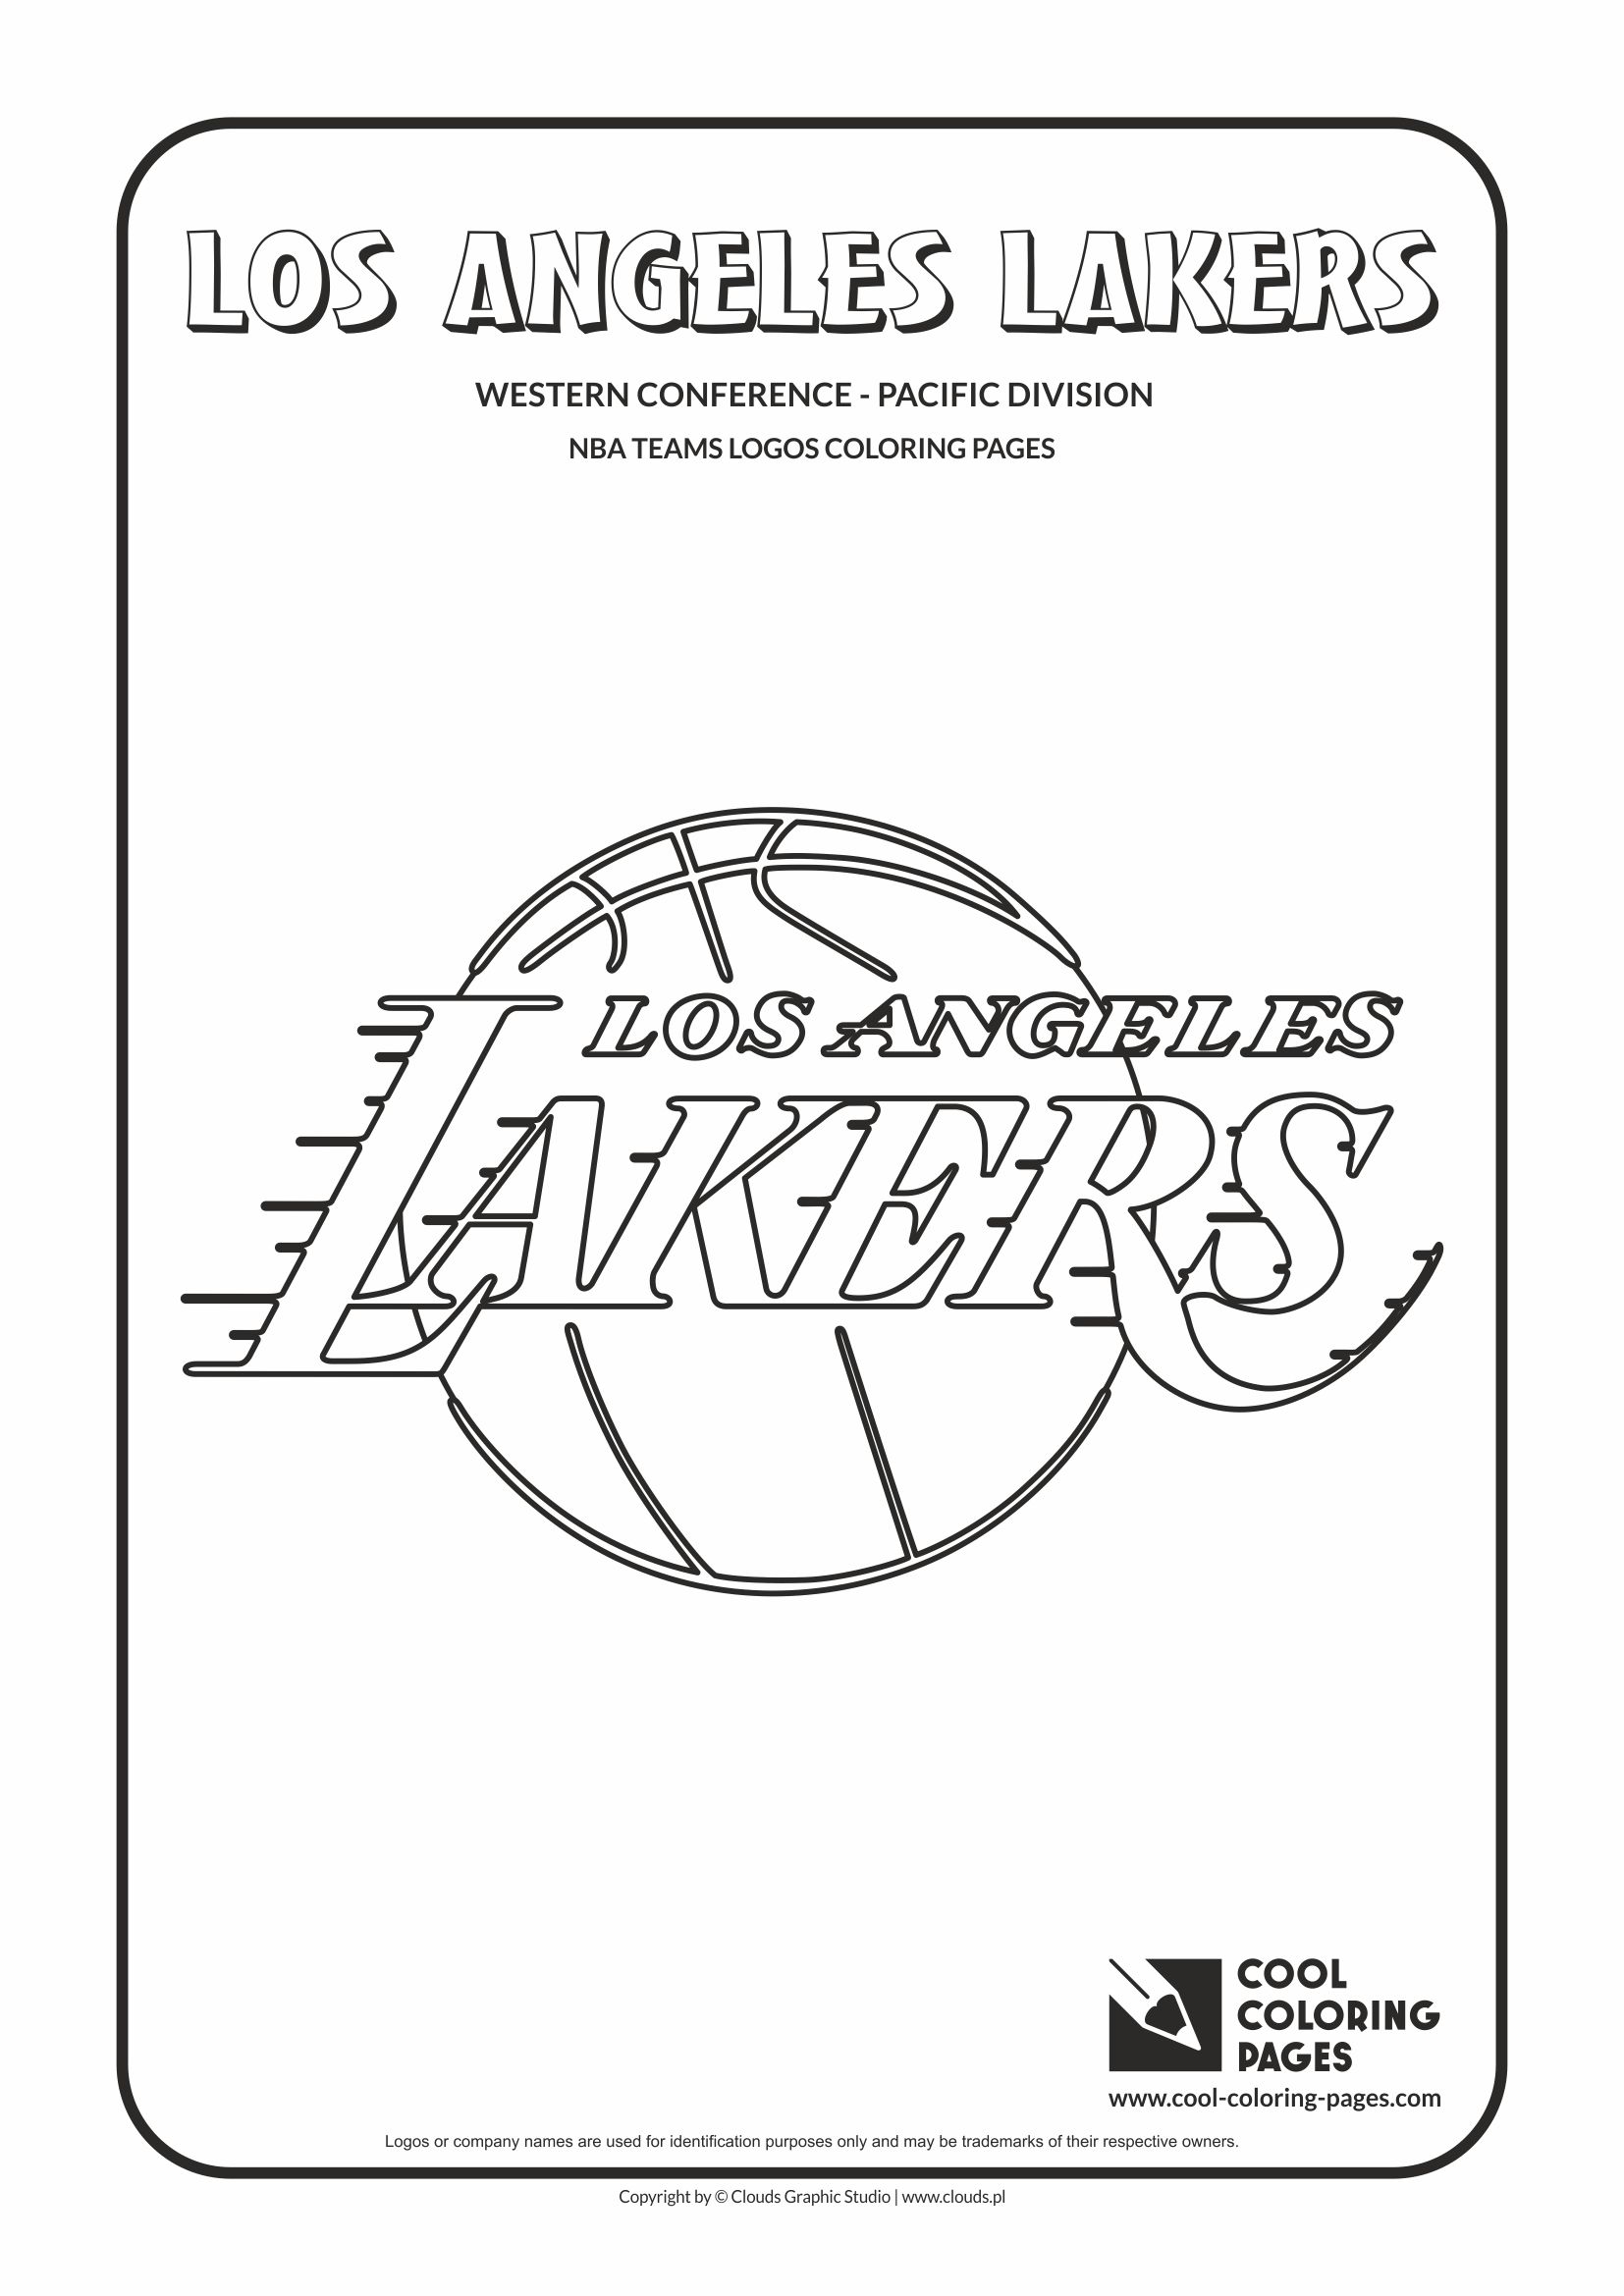 Cool Coloring Pages - NBA Basketball Clubs Logos - Western Conference - Pacific Division / Los Angeles Lakers logo / Coloring page with Los Angeles Lakers logo